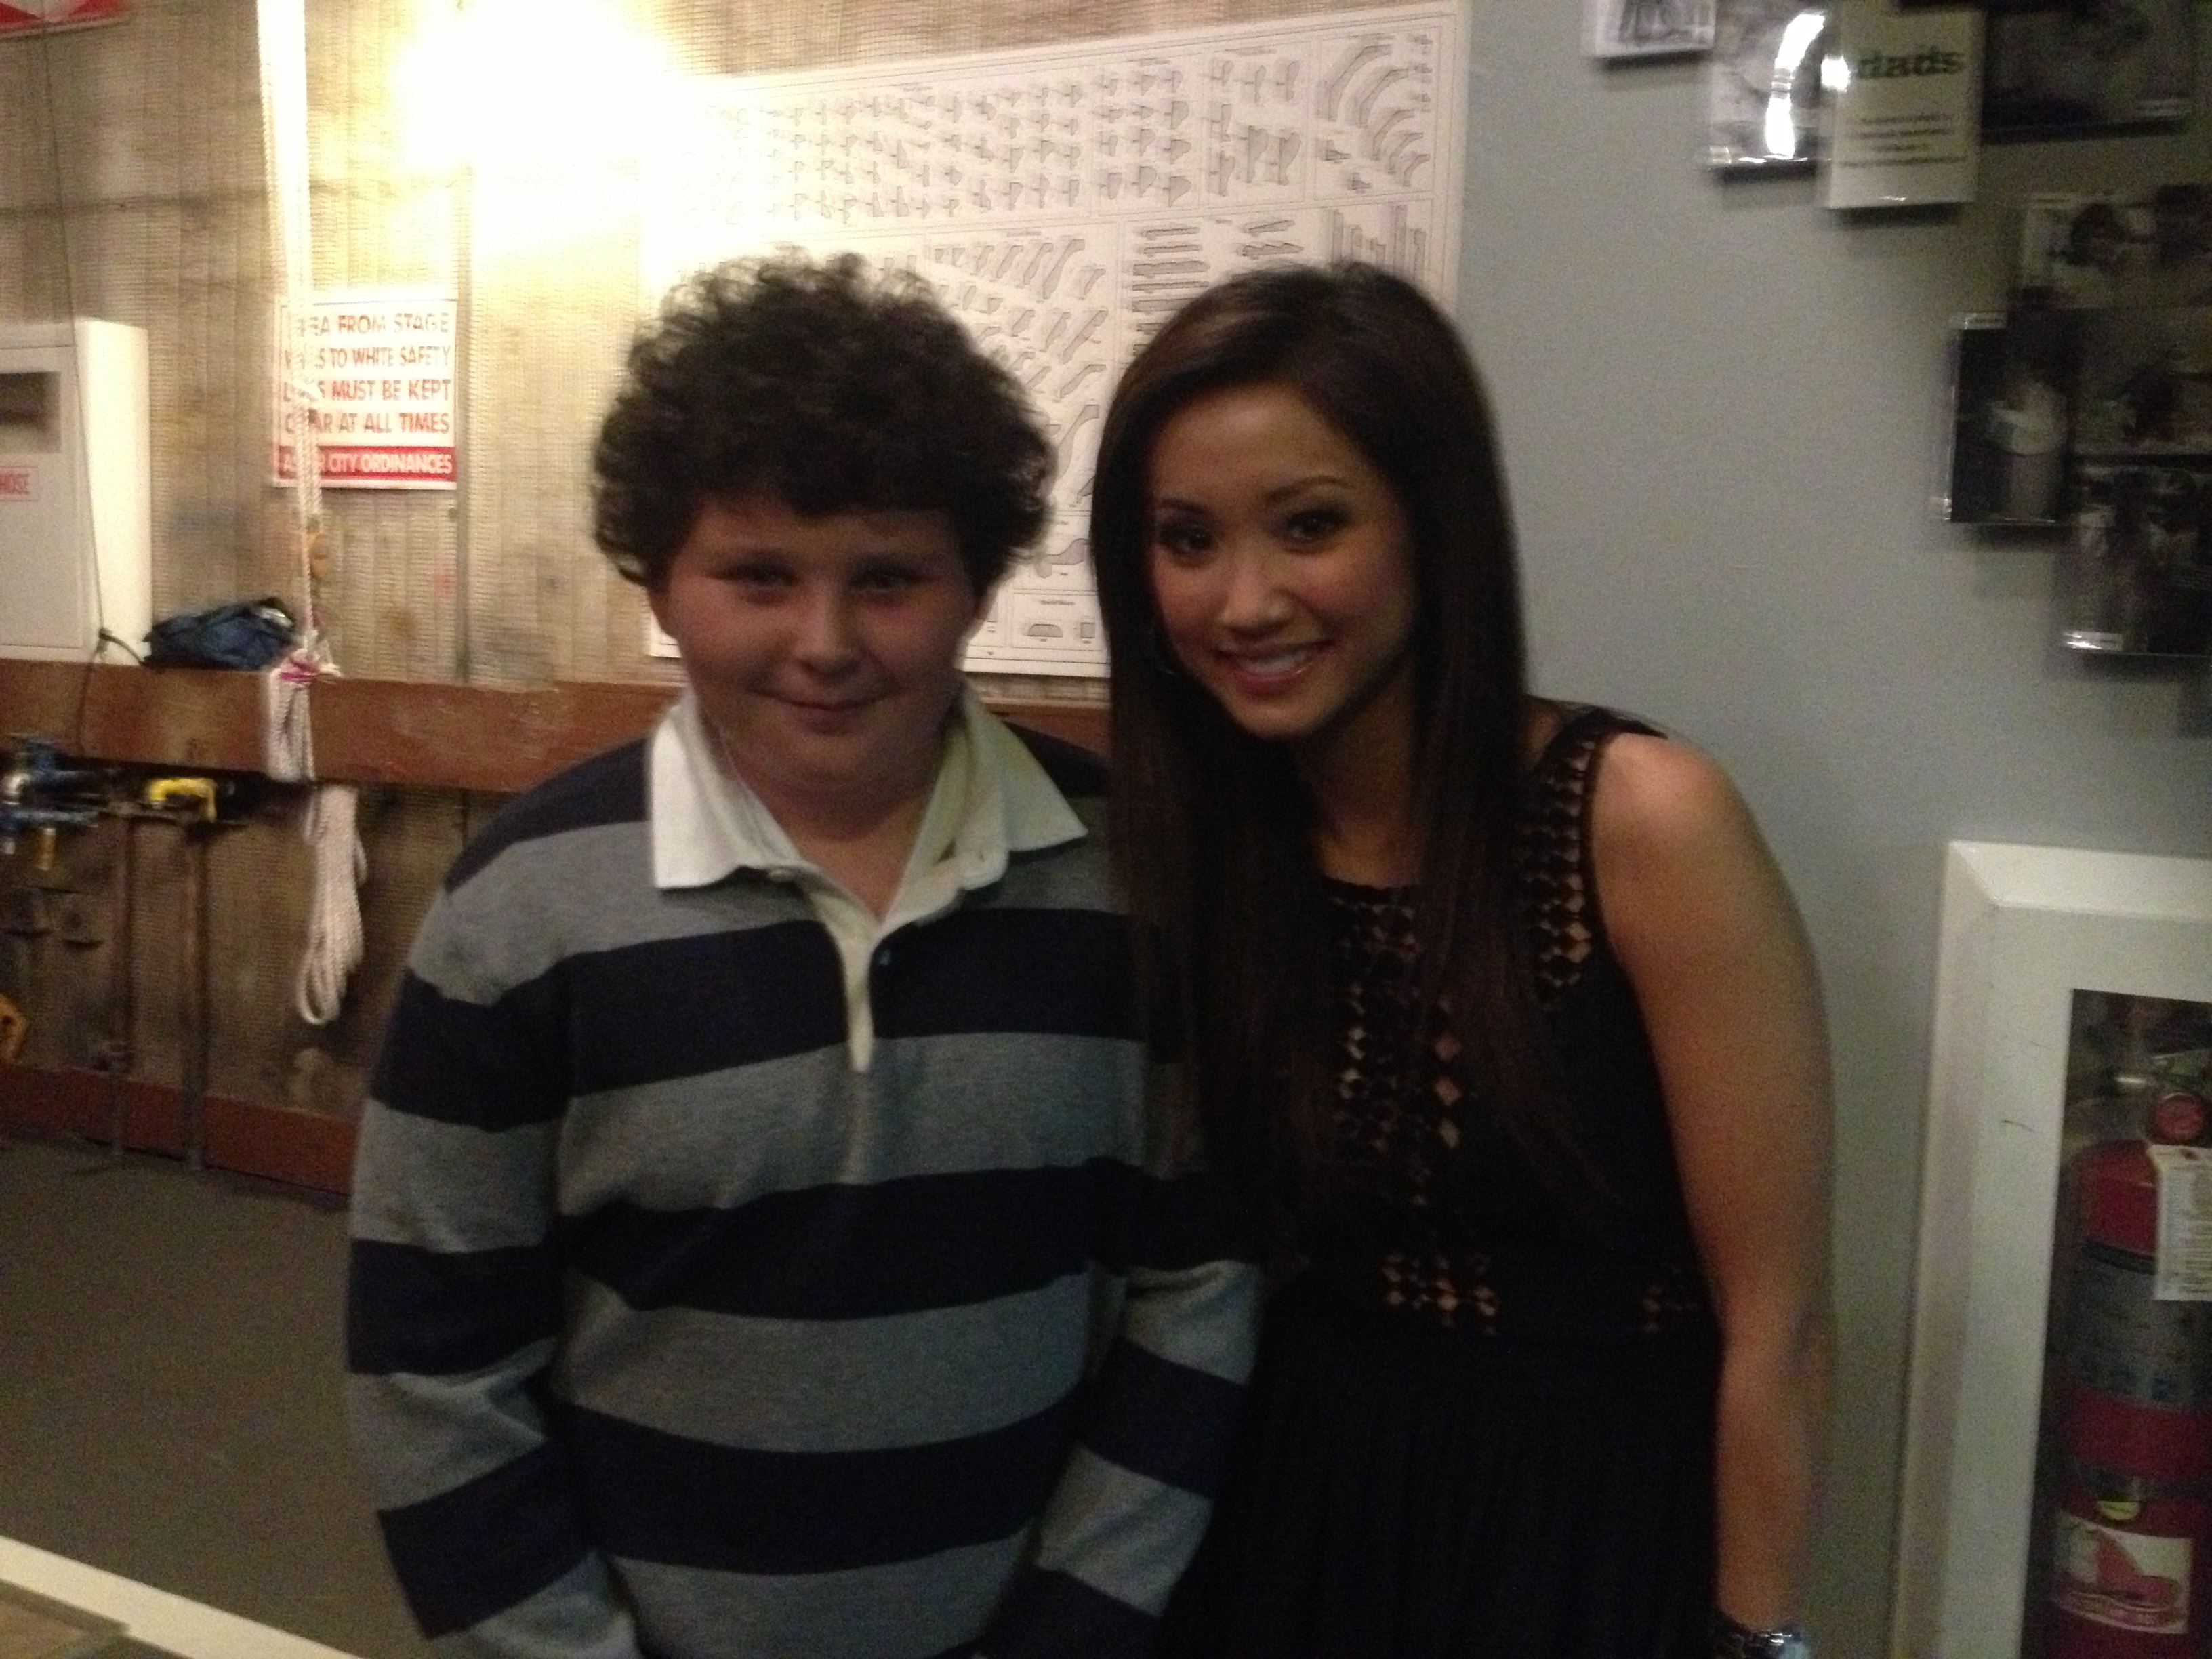 Josh and Brenda Song Dads